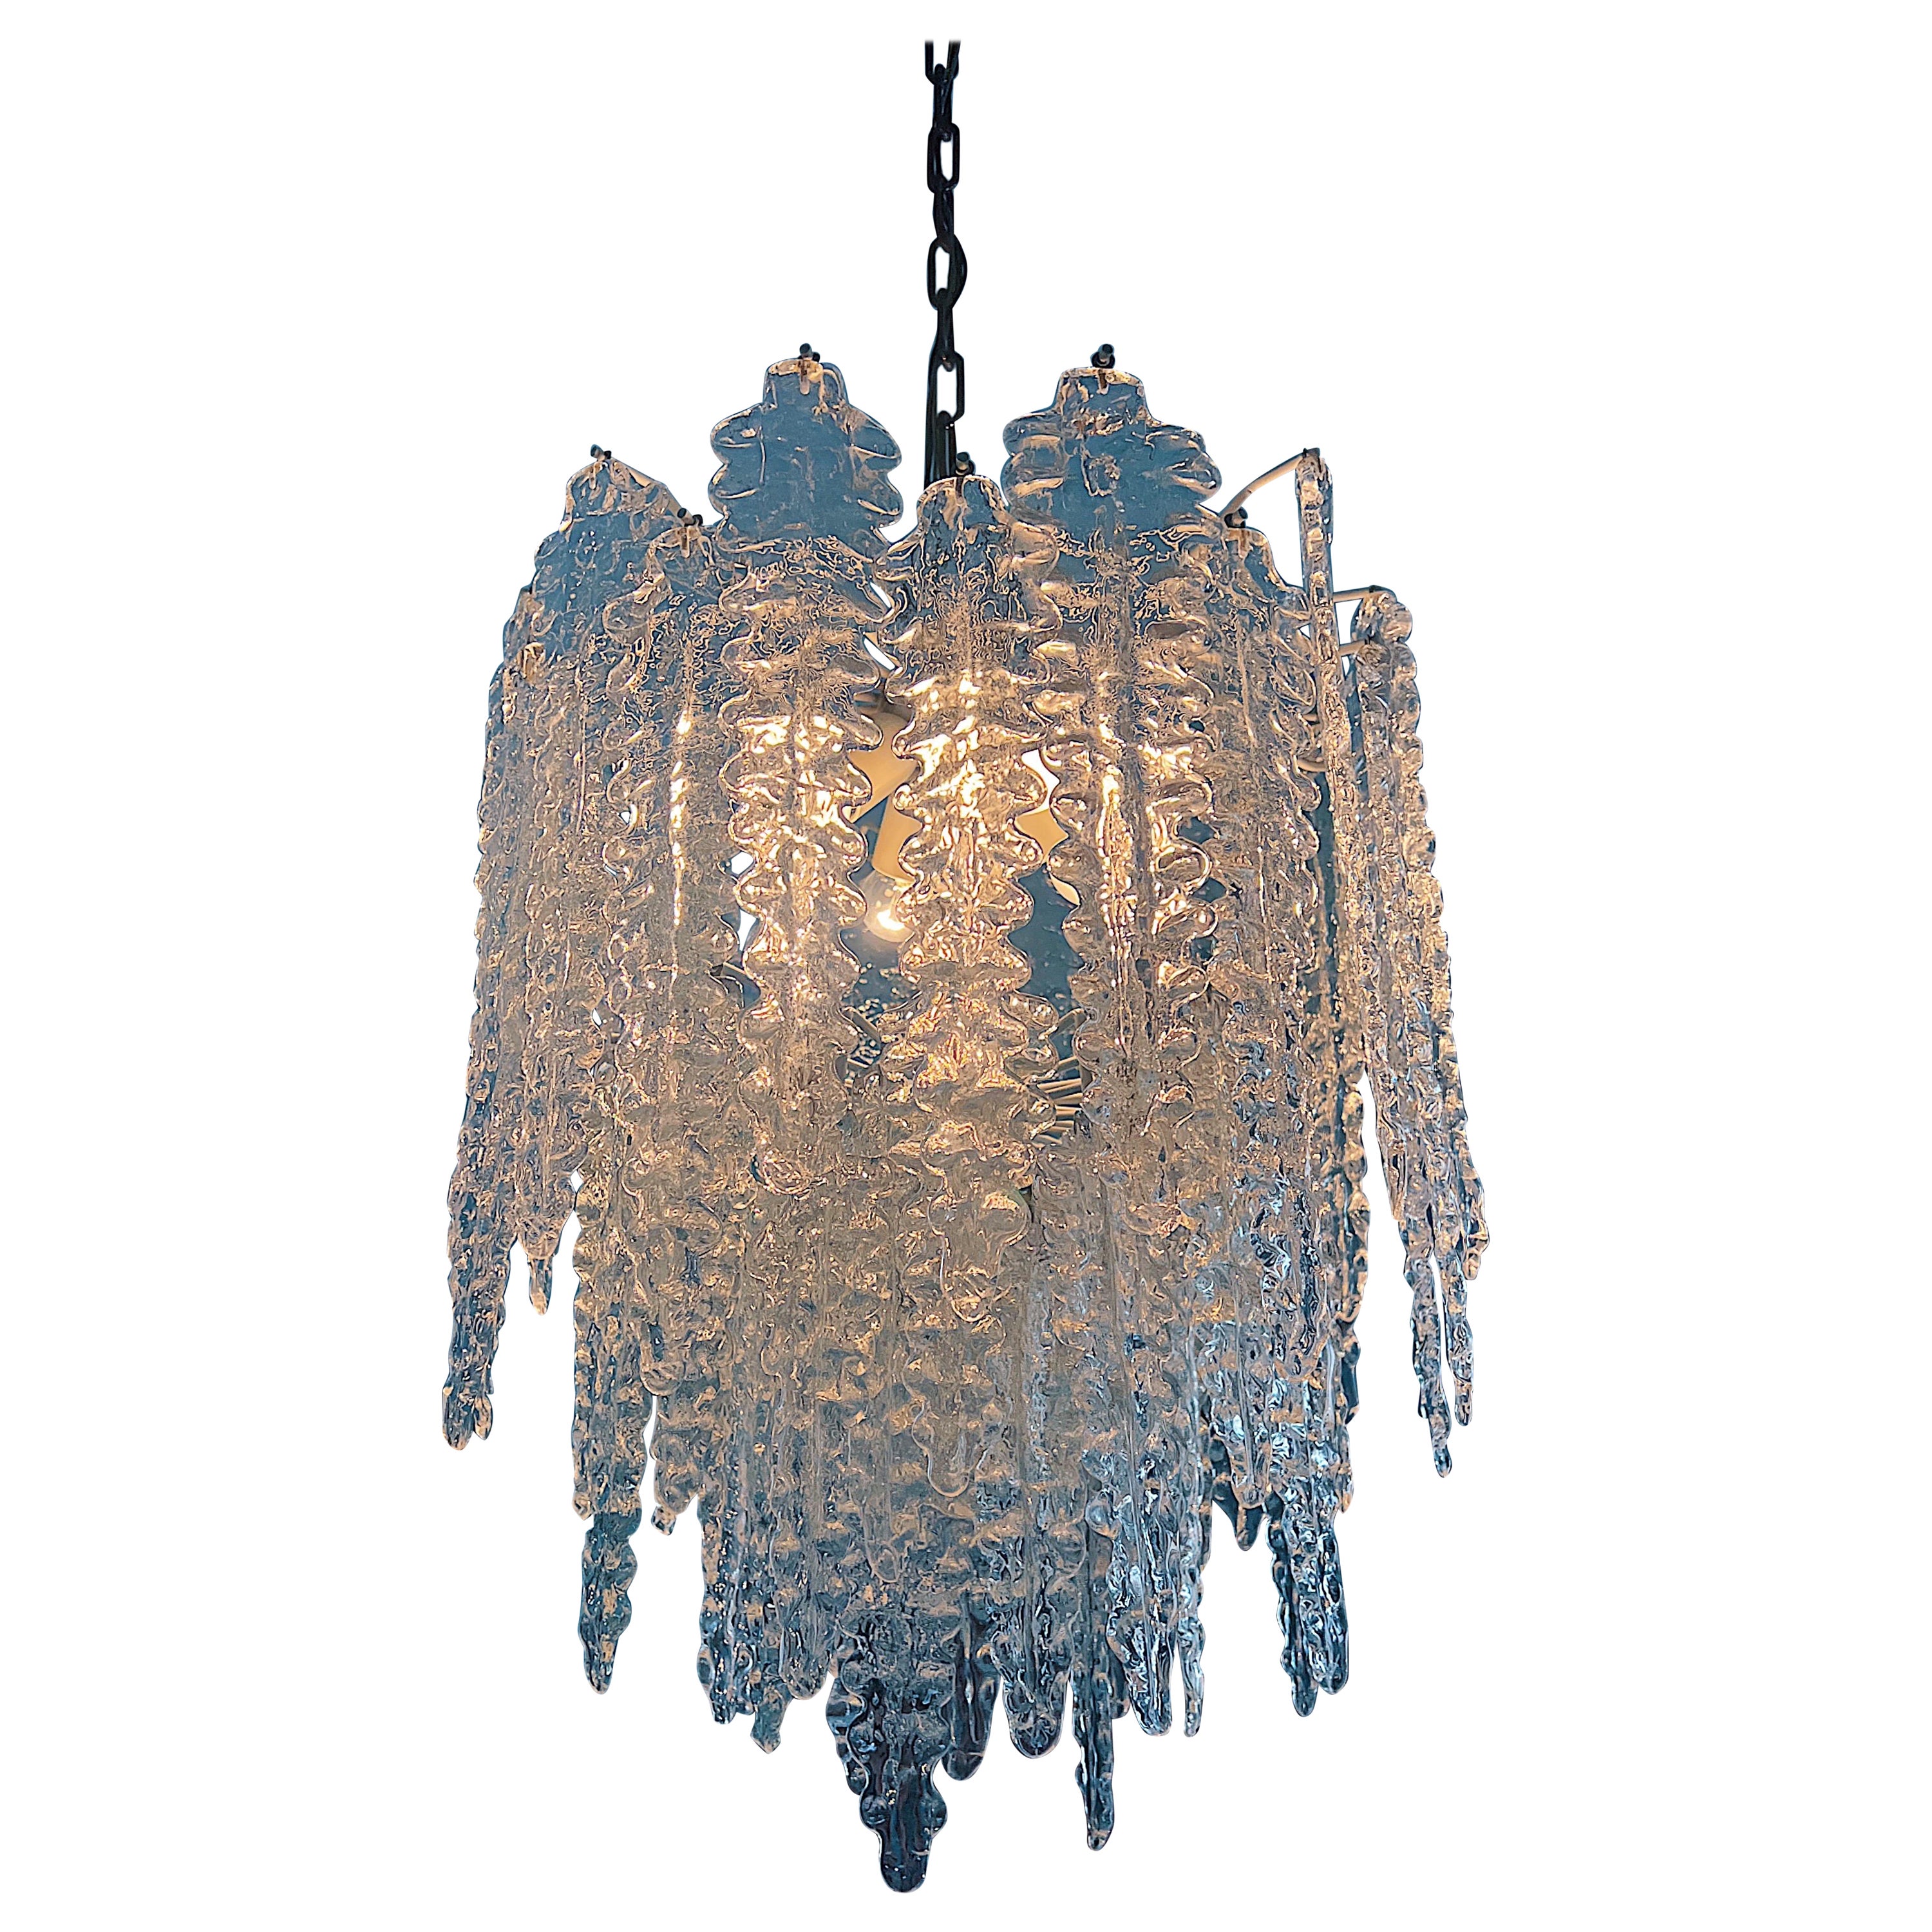 Midcentury Chandelier by Venini, 1960s from the Alga Series